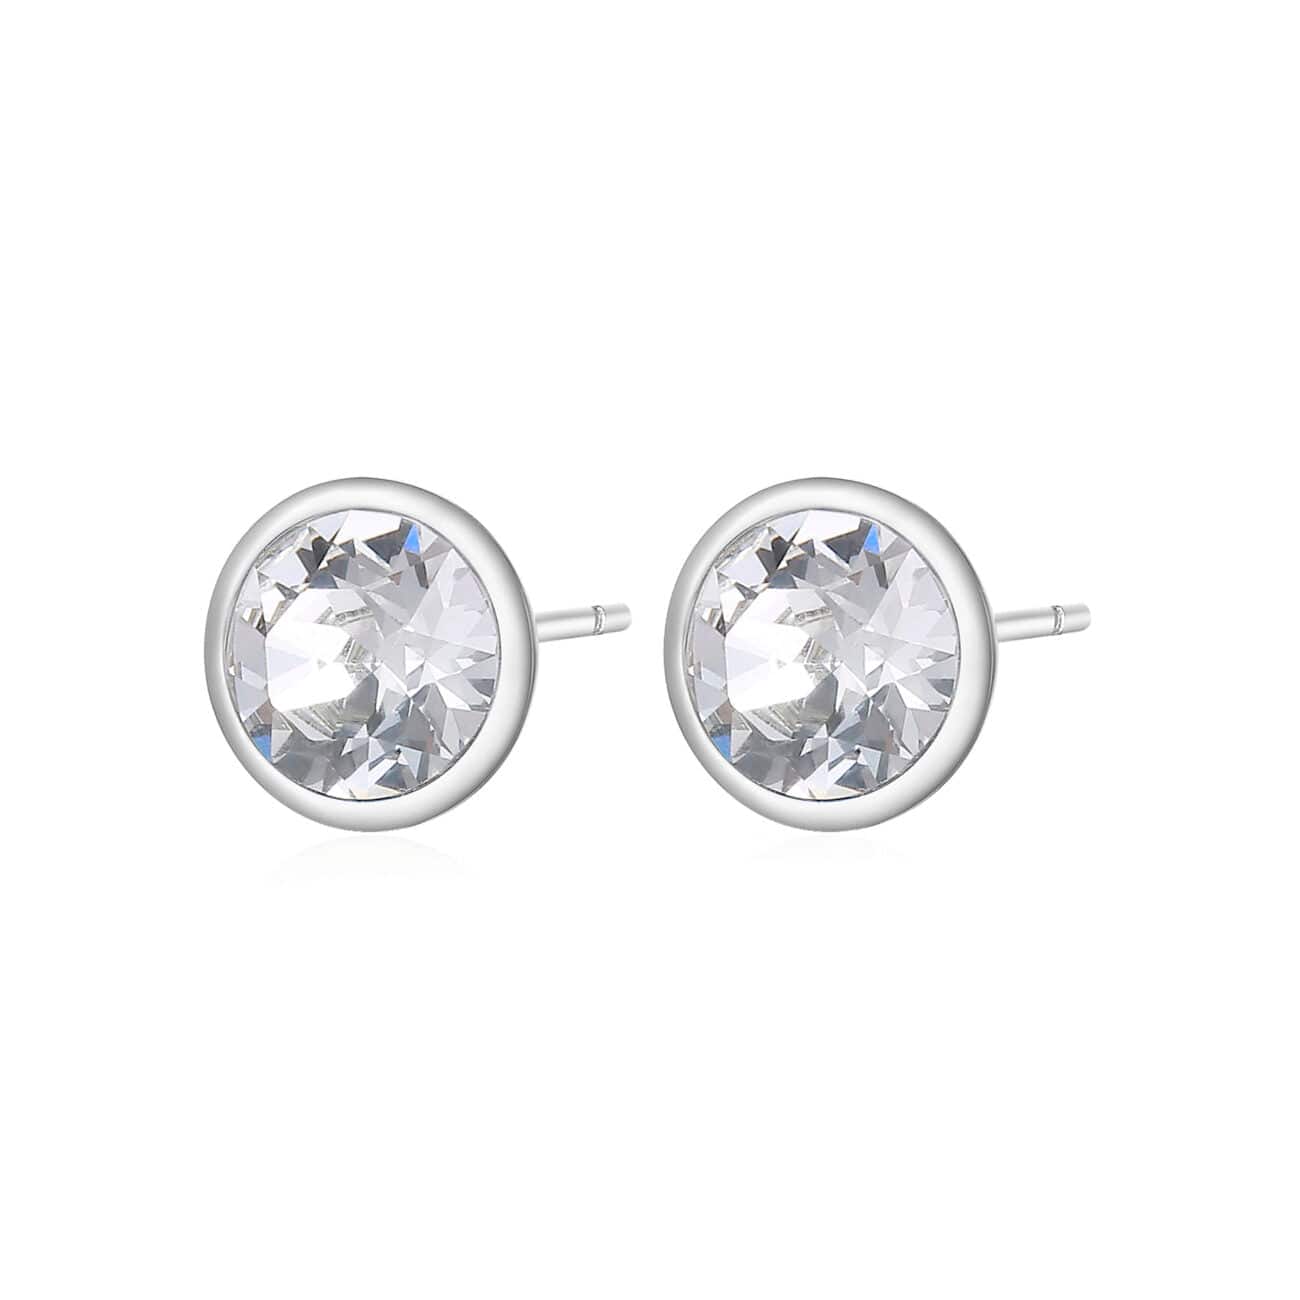 Load image into Gallery viewer, EAR-SS Stainless Steel Stud Earrings with Clear Crystals.
